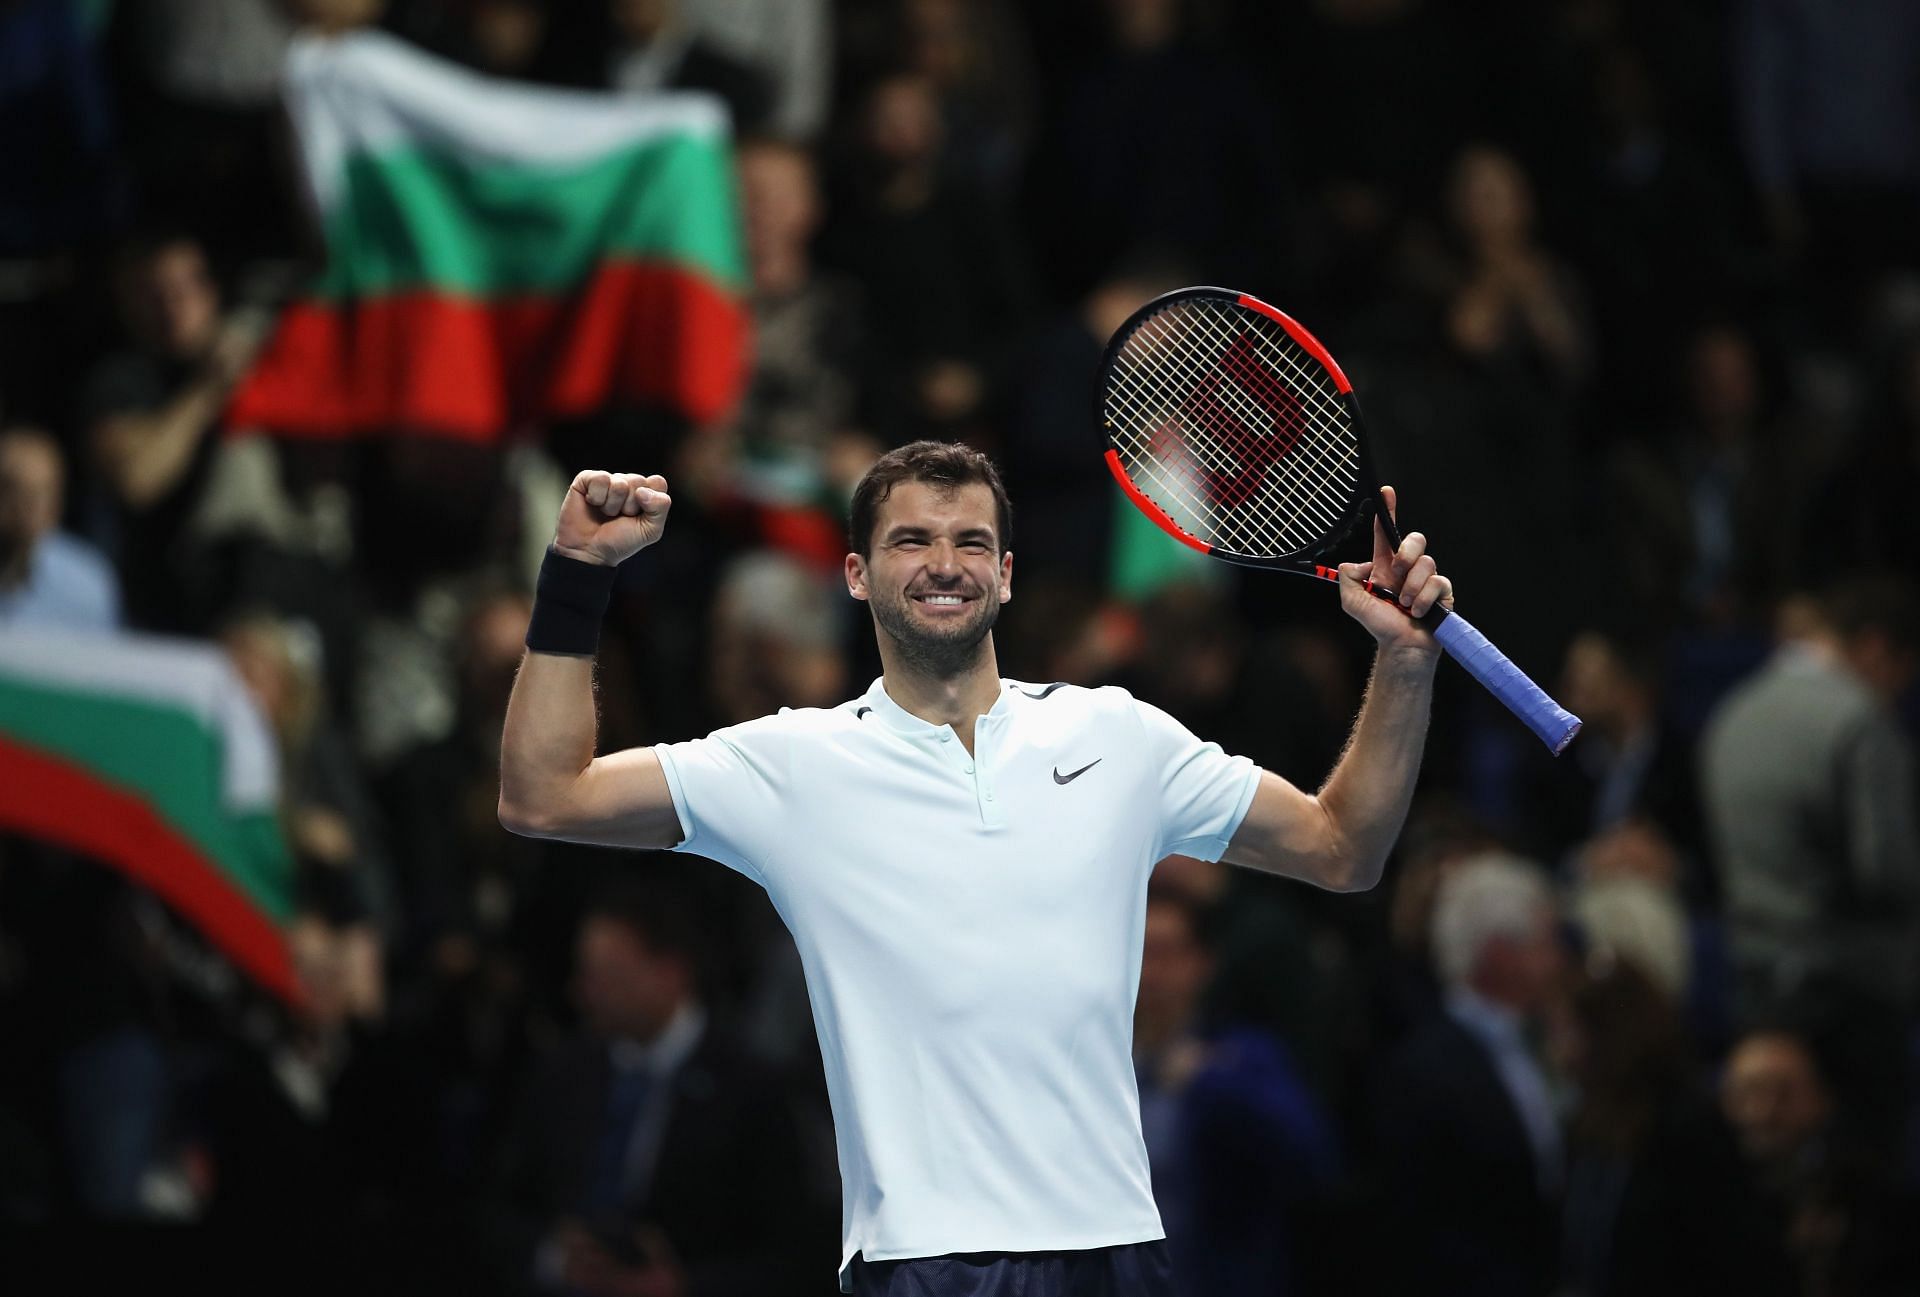 Dimitrov is regarded as the biggest flirt by many other players on the circuit